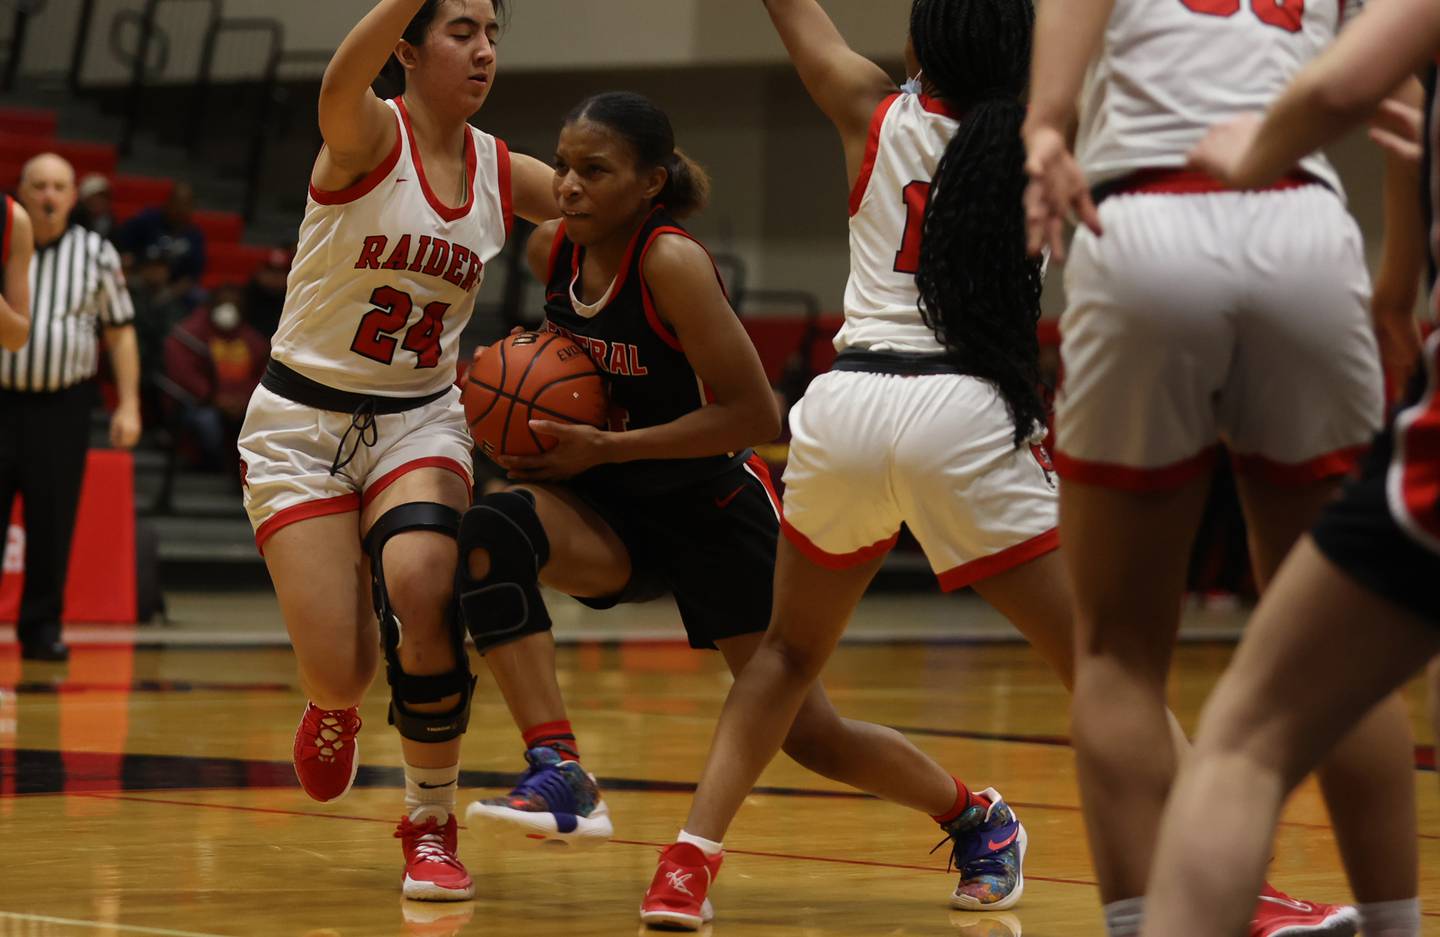 Lincoln-Way Central's Azyah Newson-Cole drives to the basket against Bolingbrook in the Bolingbrook Class 4A Sectional semifinal. Tuesday, Feb. 22nd, 2022 in Bolingbrook.